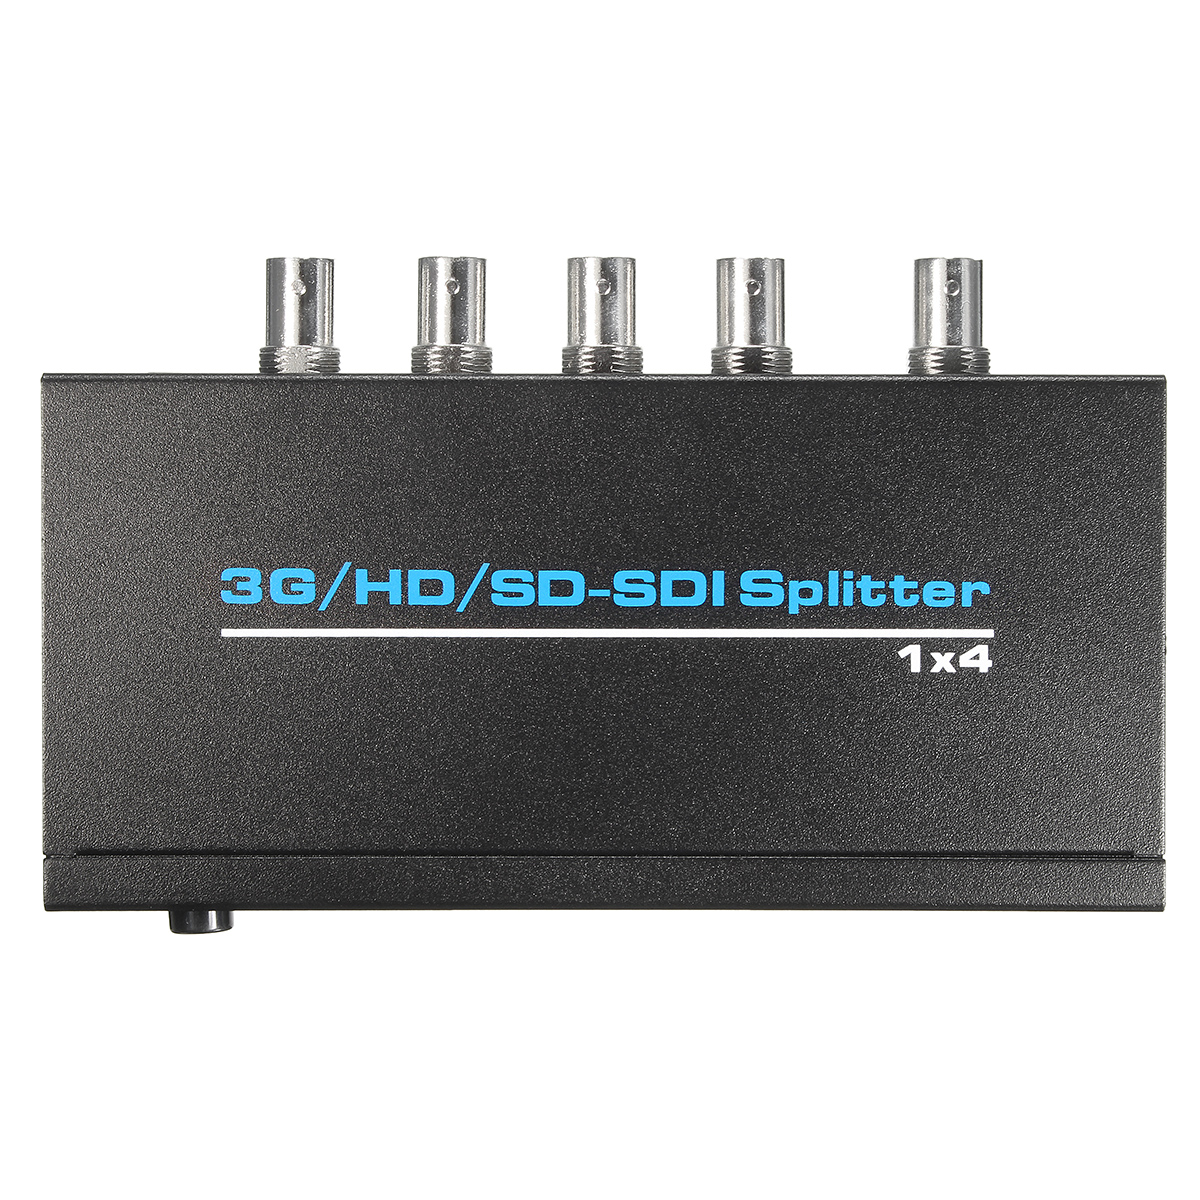 

1x4 3G/HD/SD-SDI Video Splitter BNC 1 In 4 Out Distributor 1920*1080p for HDTV Switcher